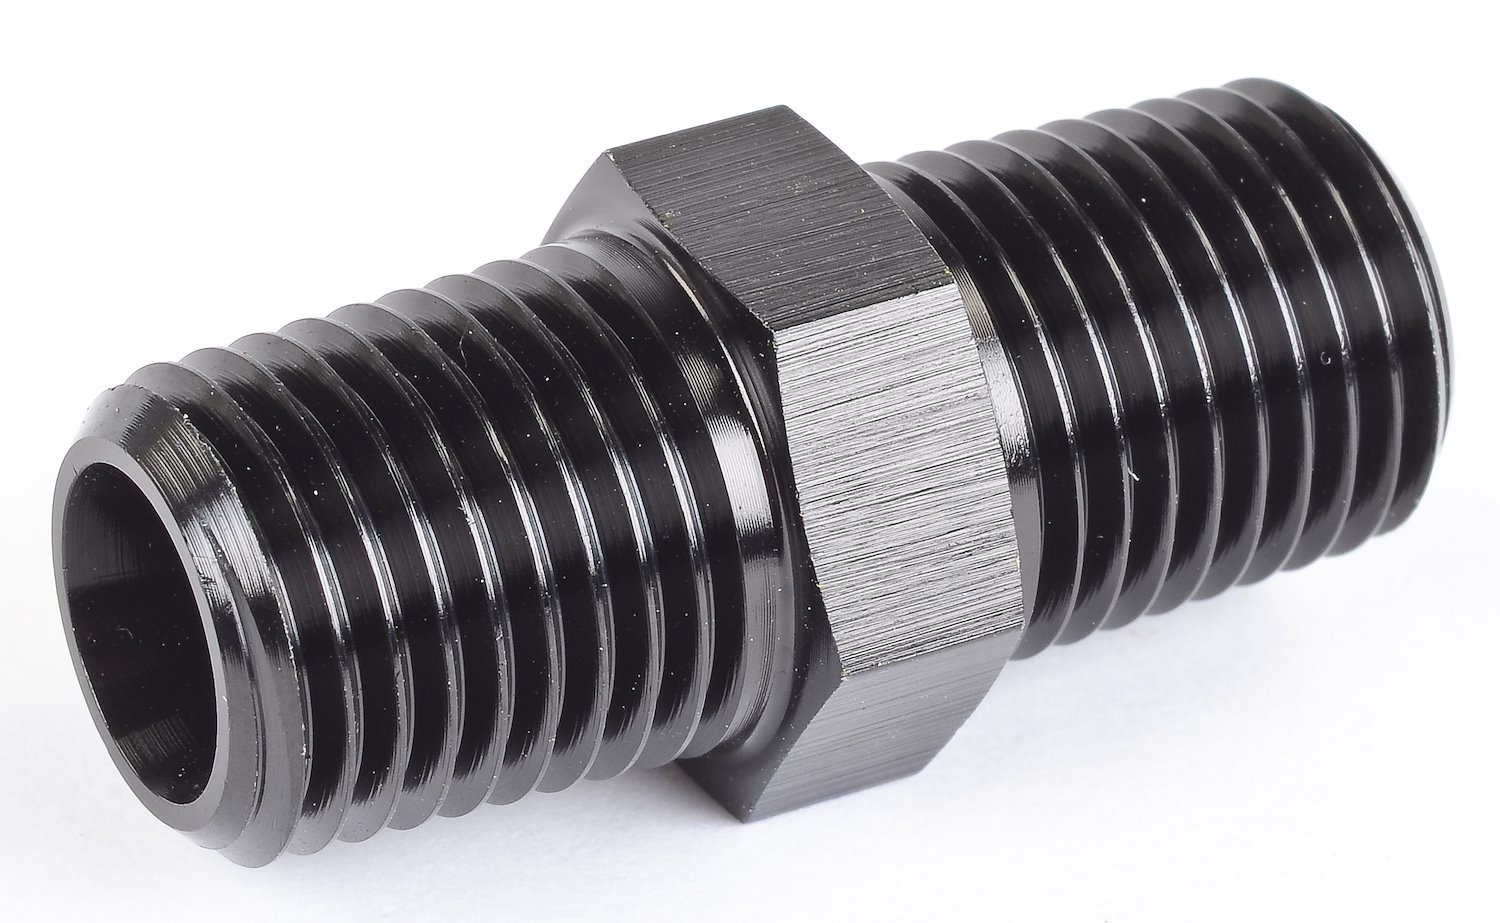 NPT to NPT Straight Union Fitting [1/4 in. NPT Male to 1/4 in. NPT Male, Black]